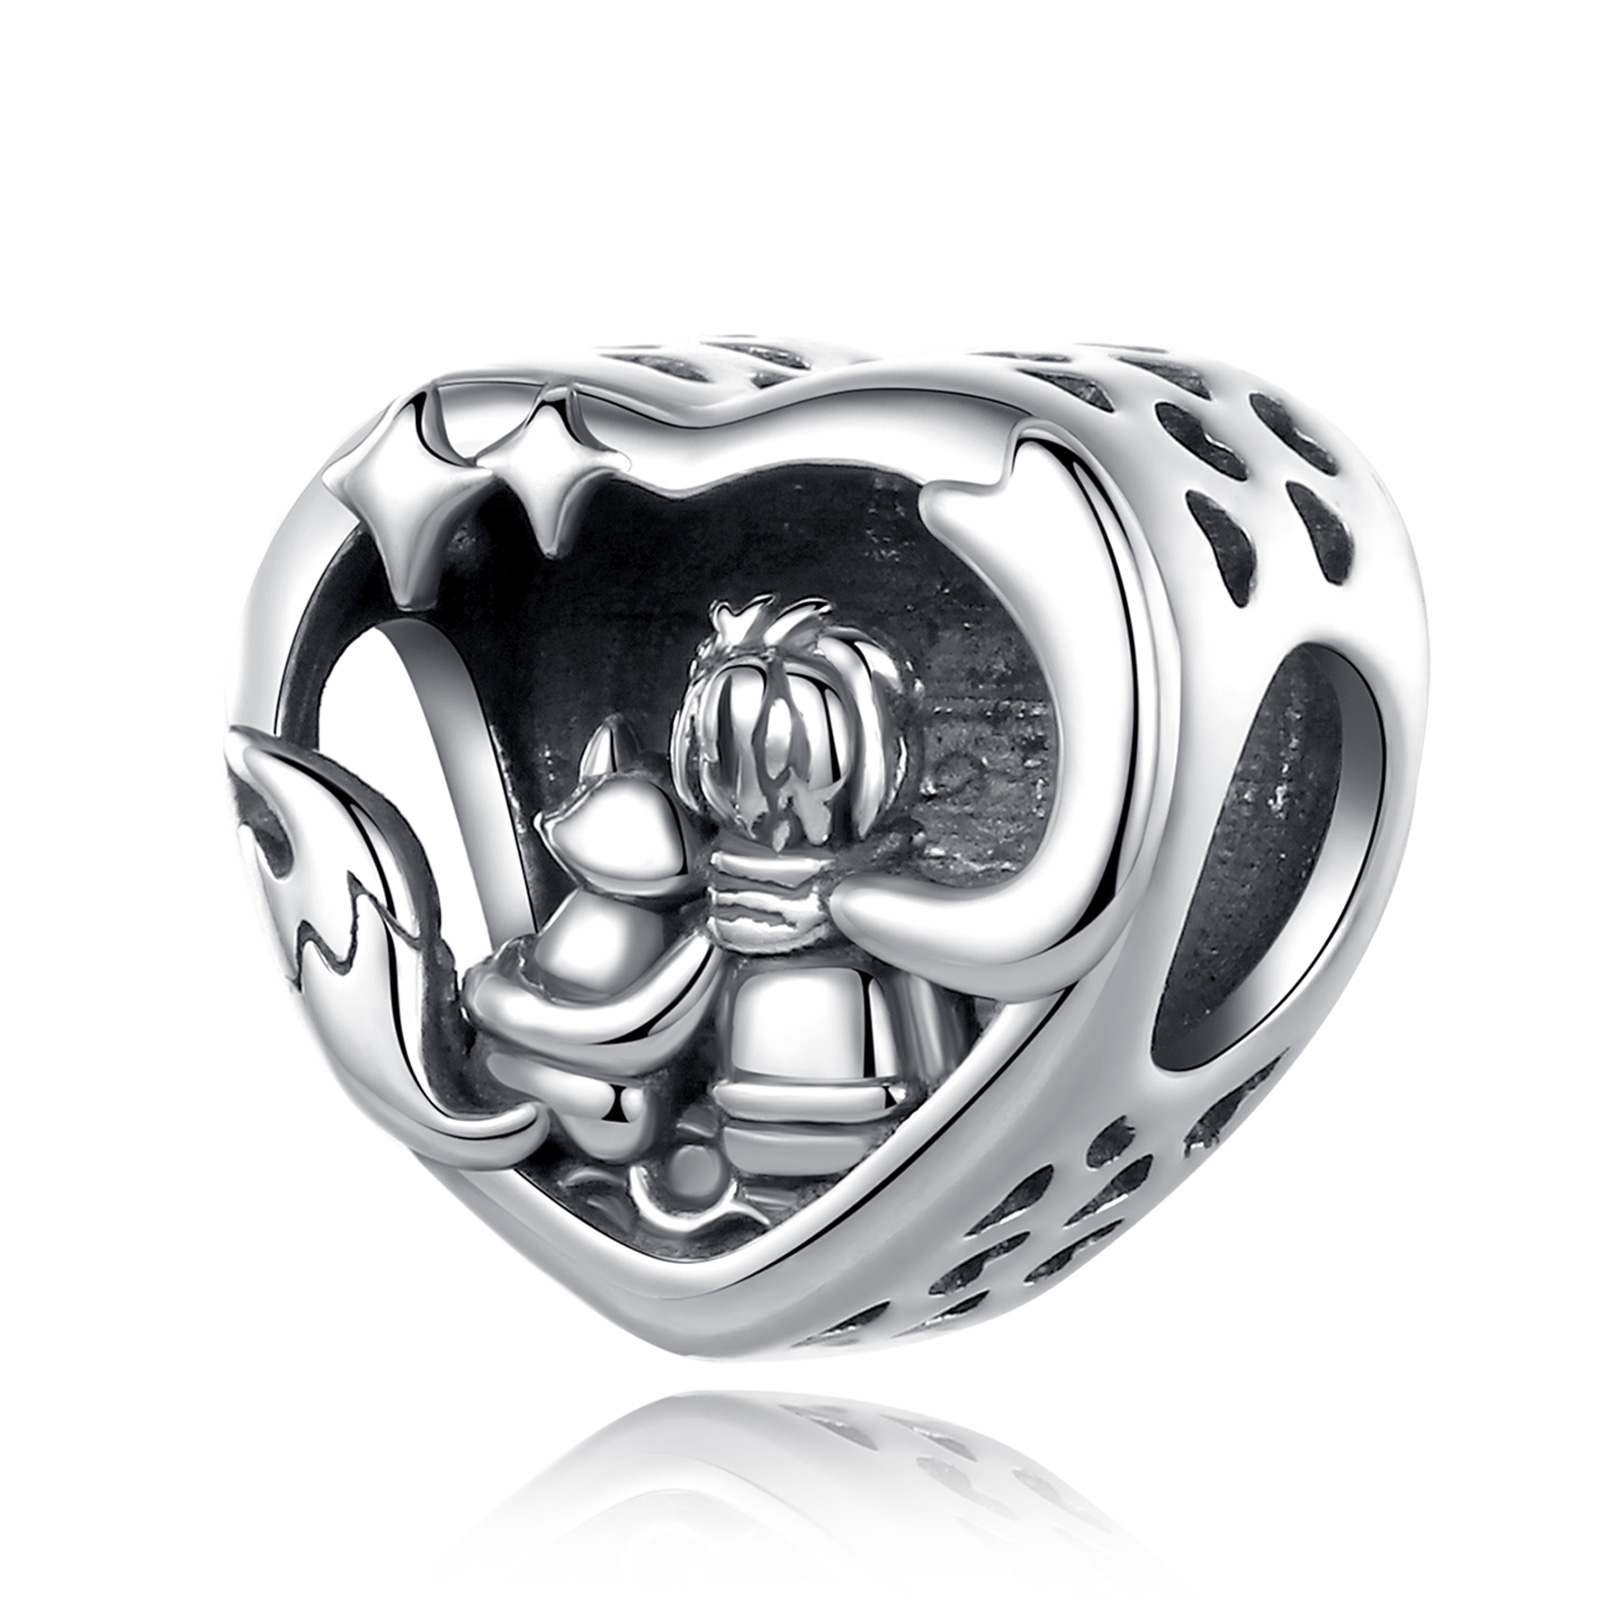 Merryhine Wholesale Fine Jewelry 925 Sterling Silver The Little Prince Bead for Bracelet DIY